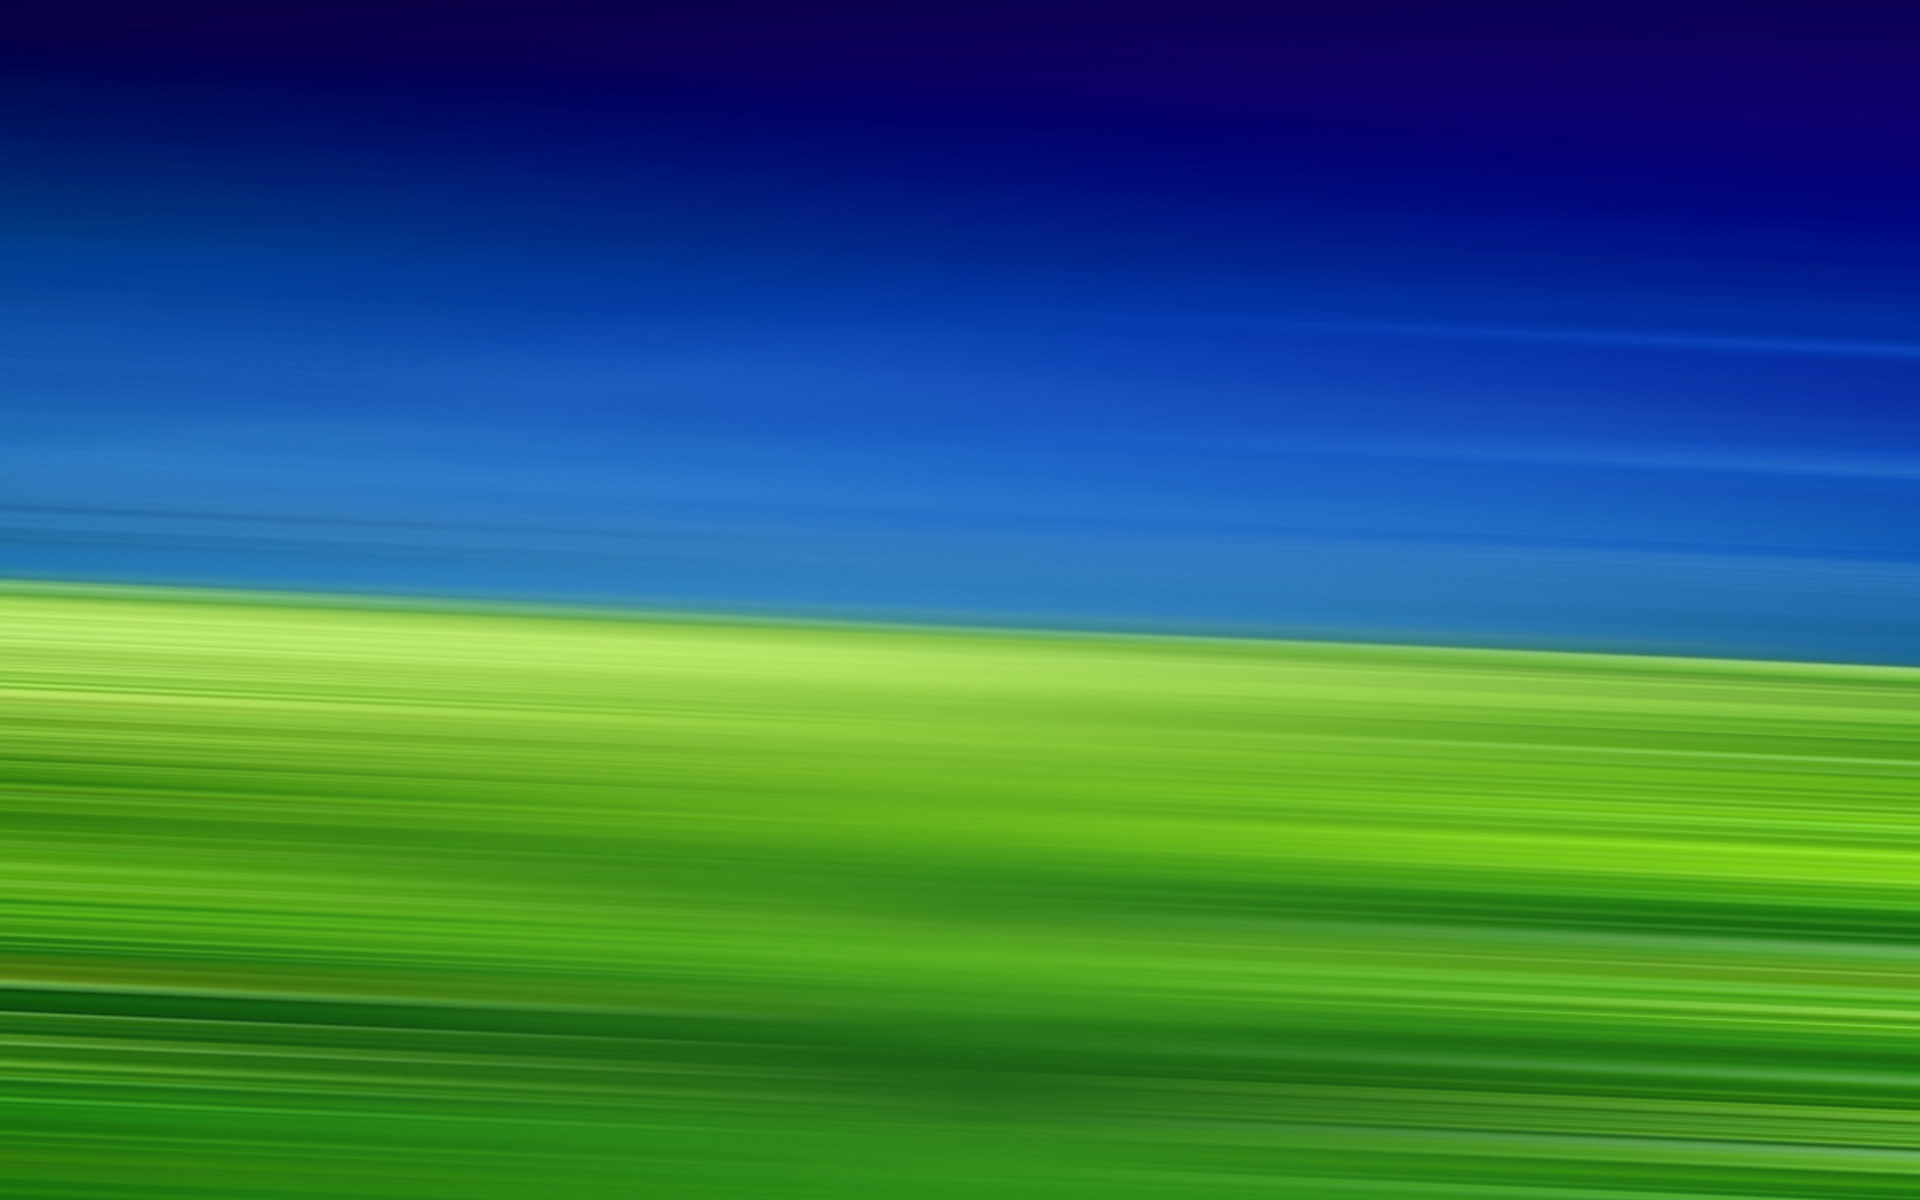 1920x1200 Blue And Green wallpaper - 347794